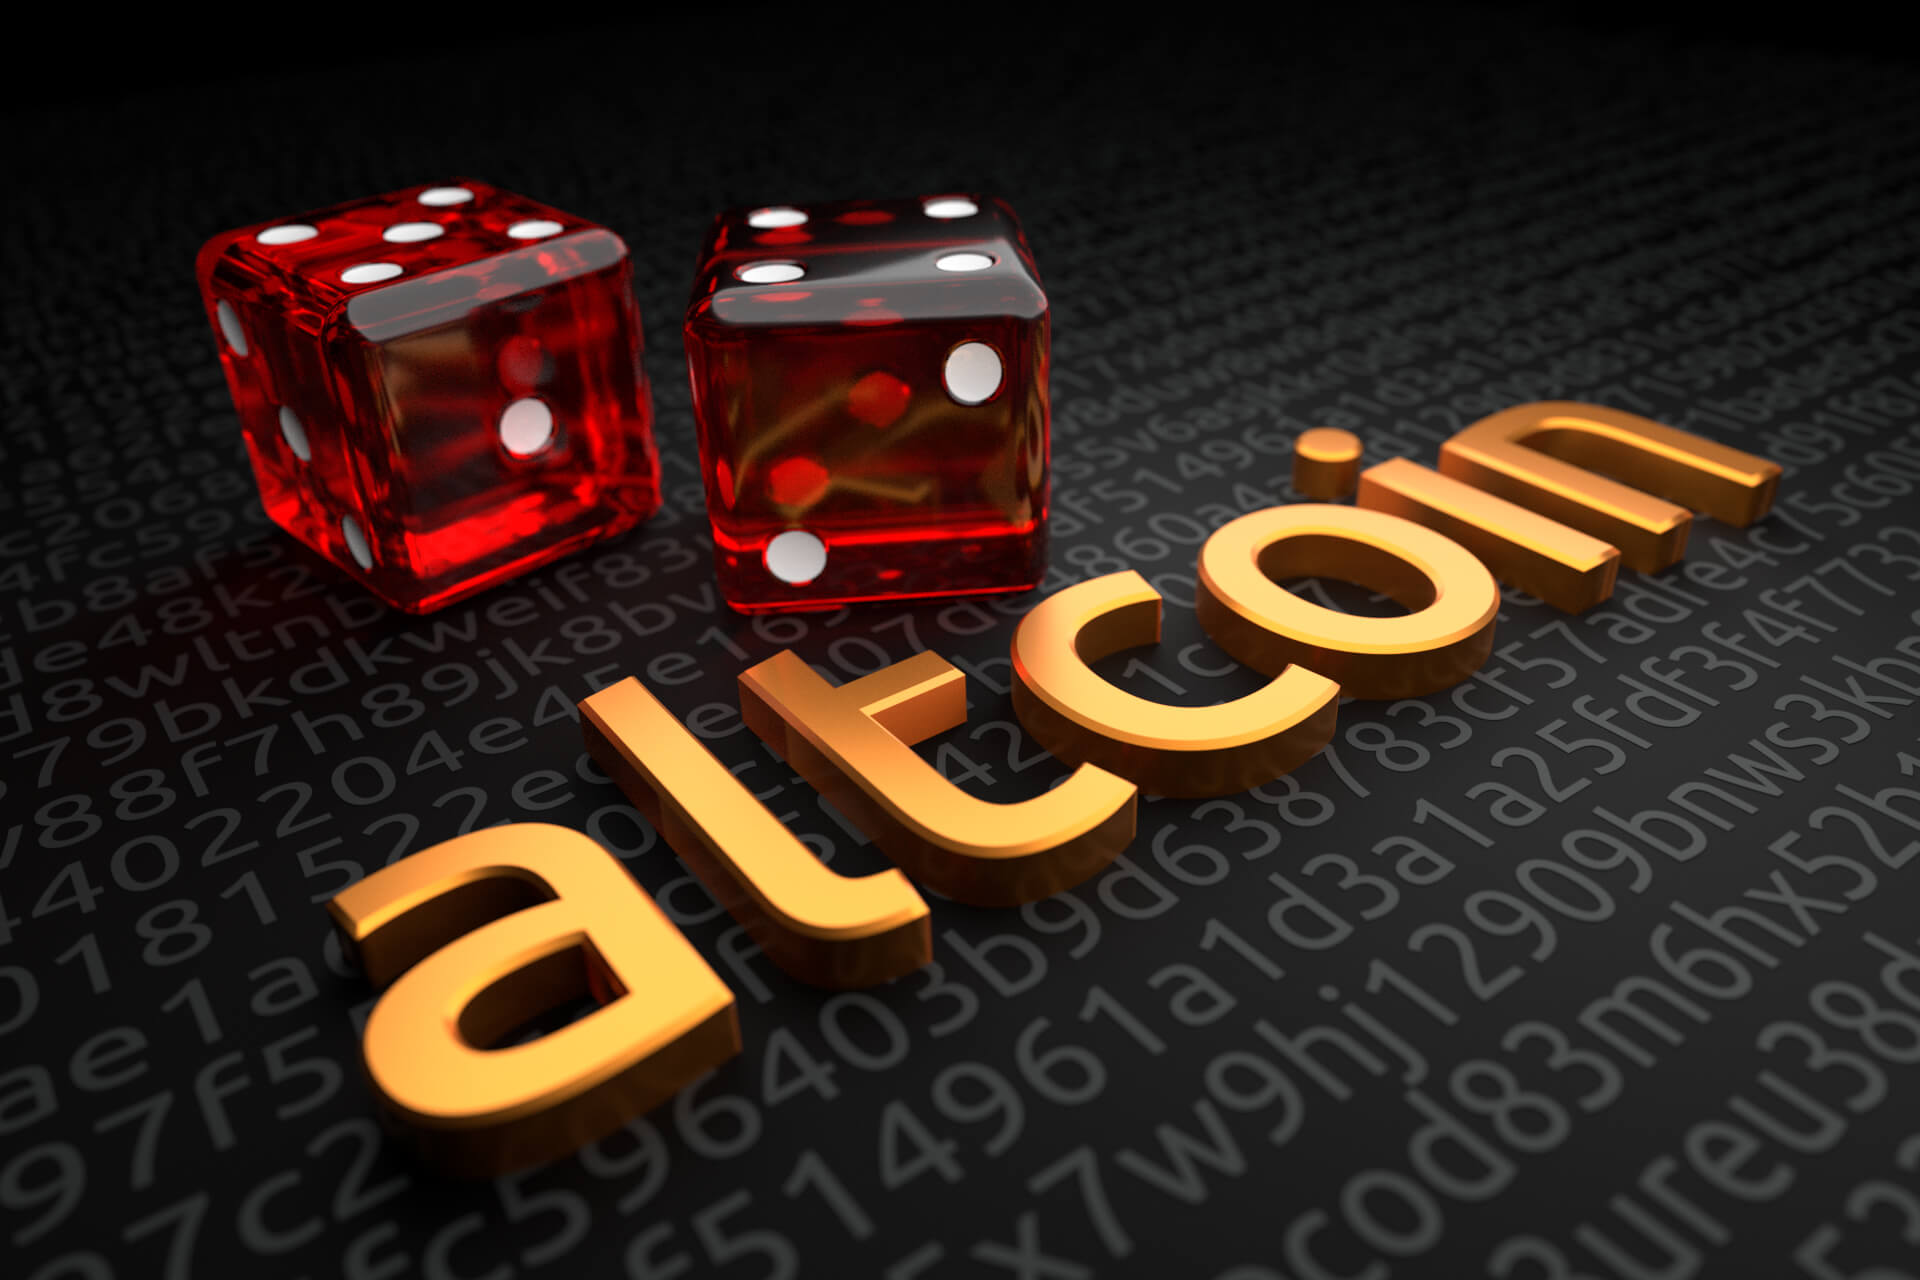 Altcoin blockchain with dice free image download